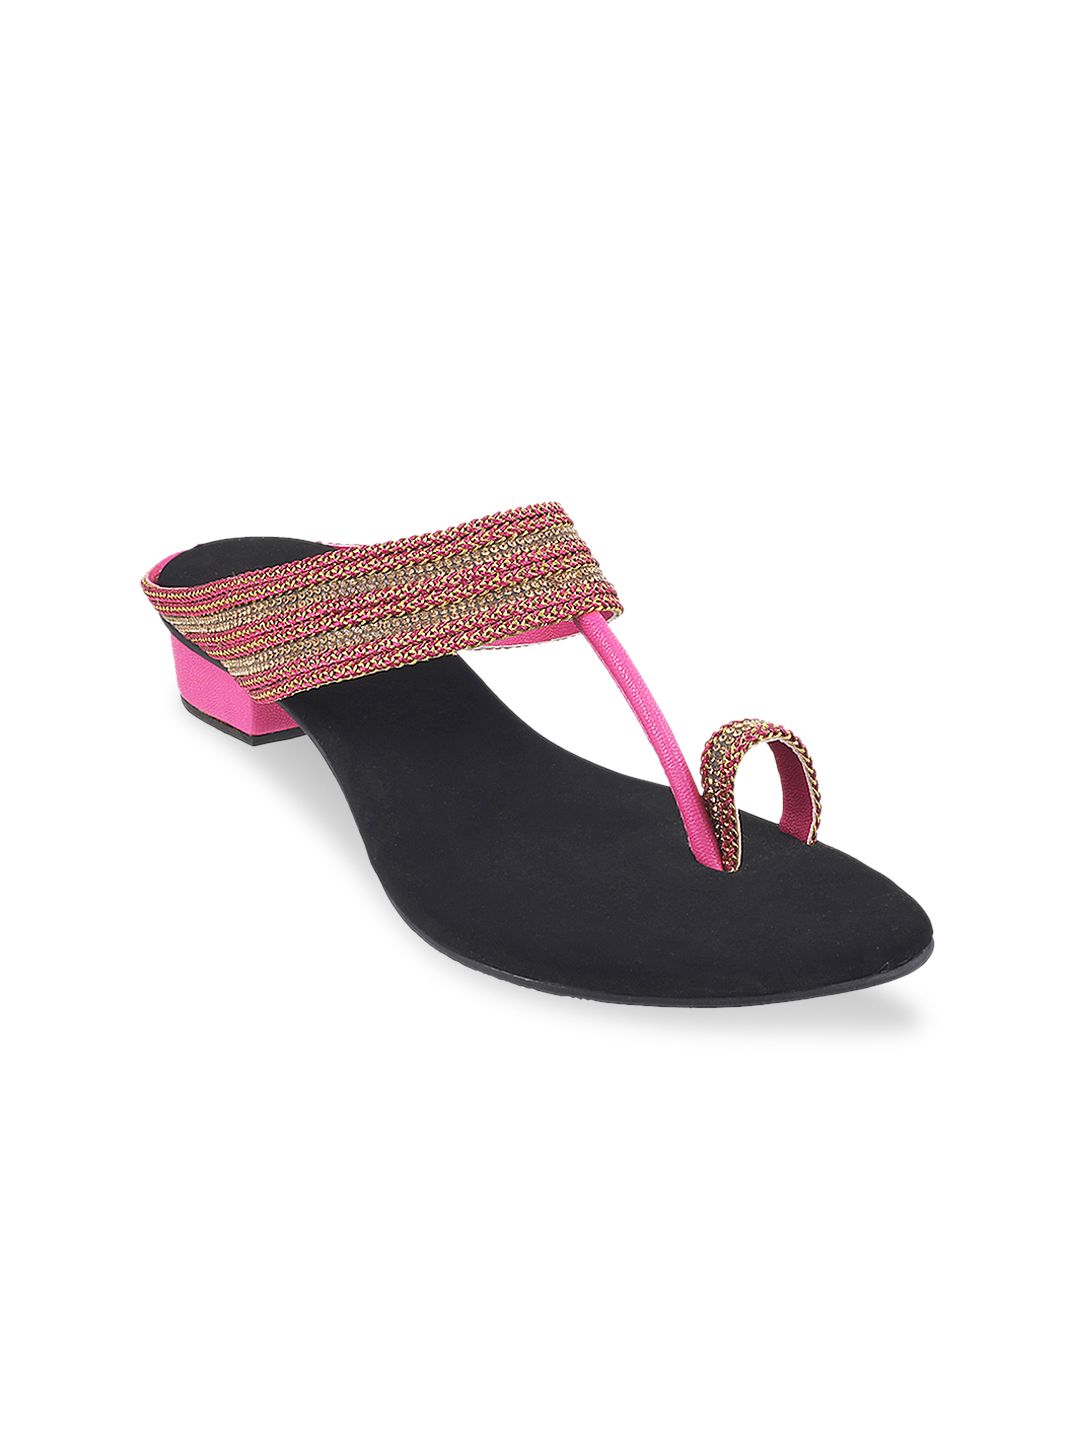 Mochi Women Pink Woven Design Sandals Price in India